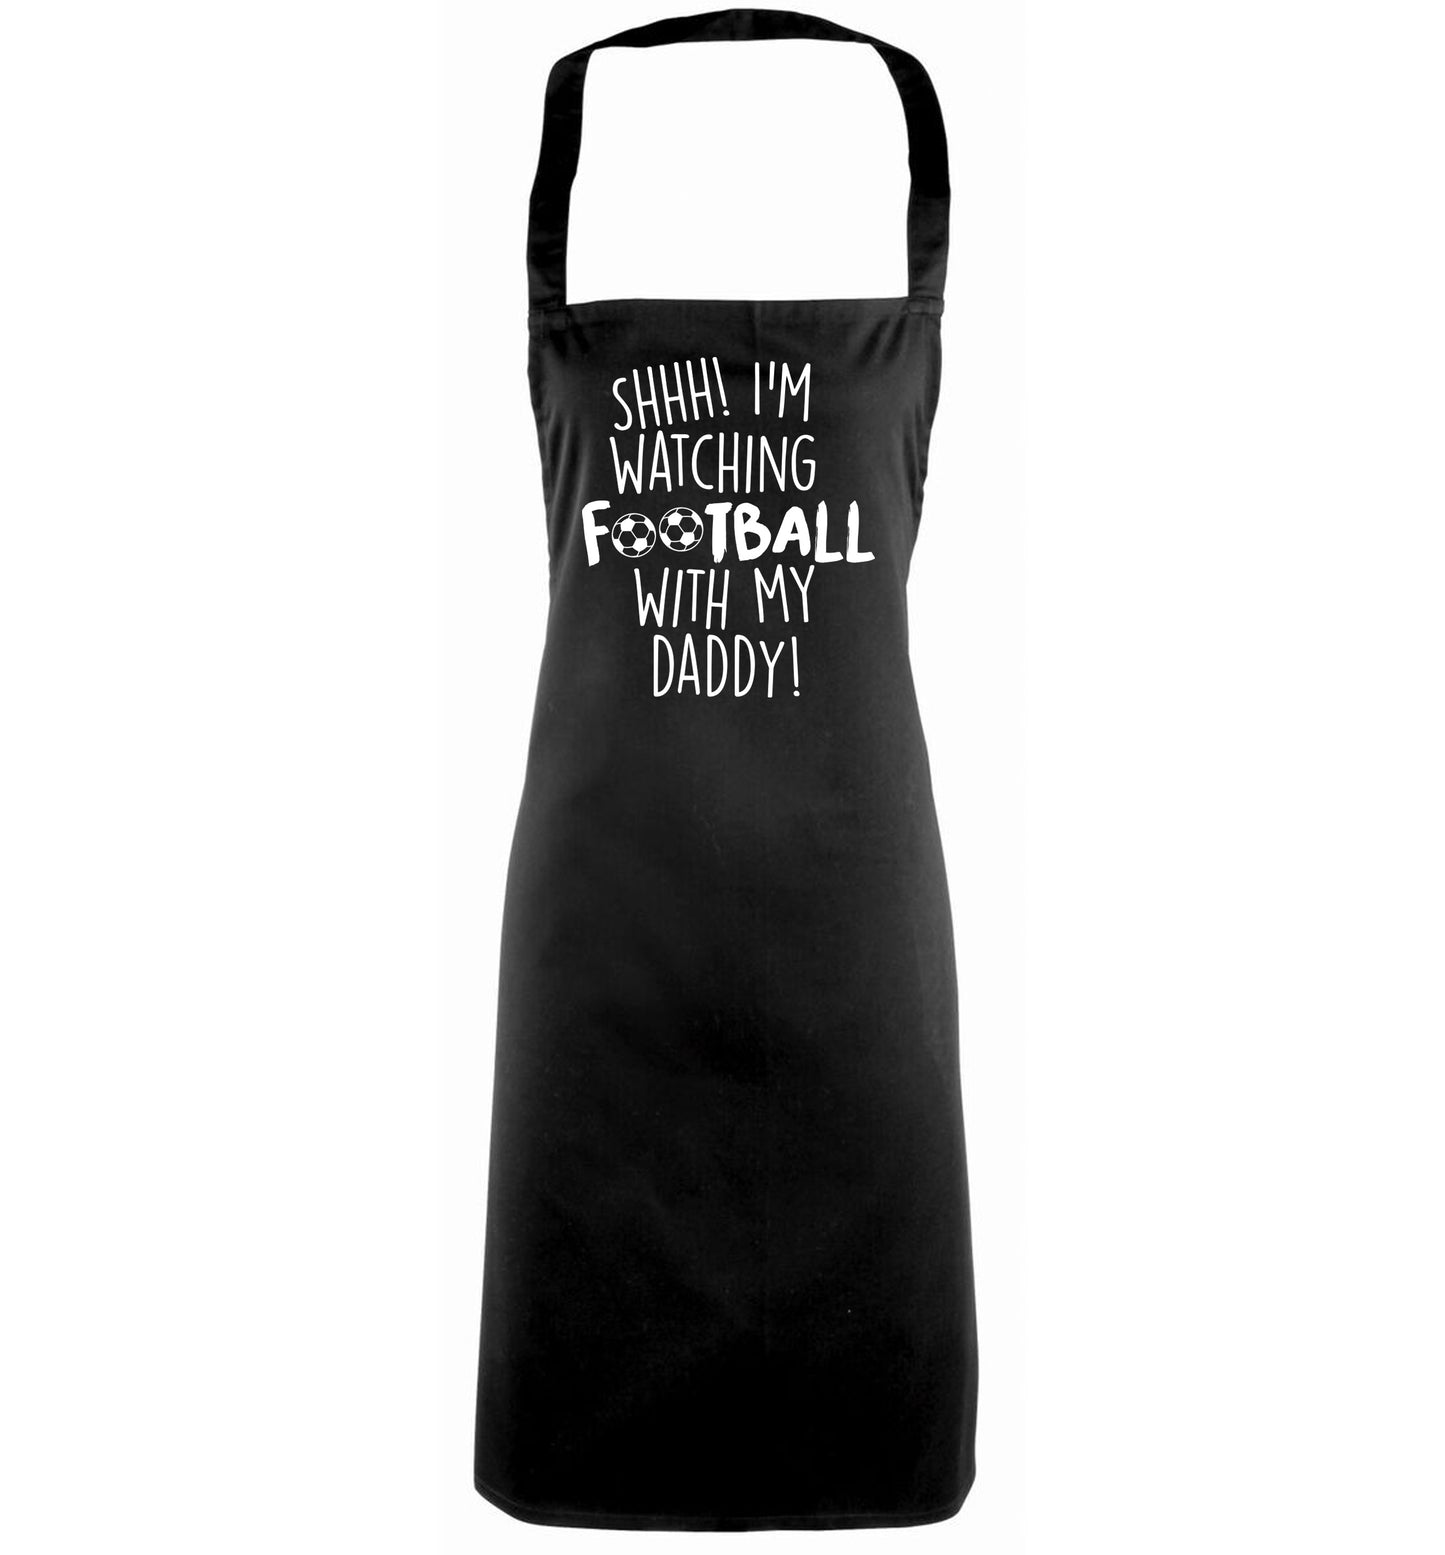 Shhh I'm watching football with my daddy black apron